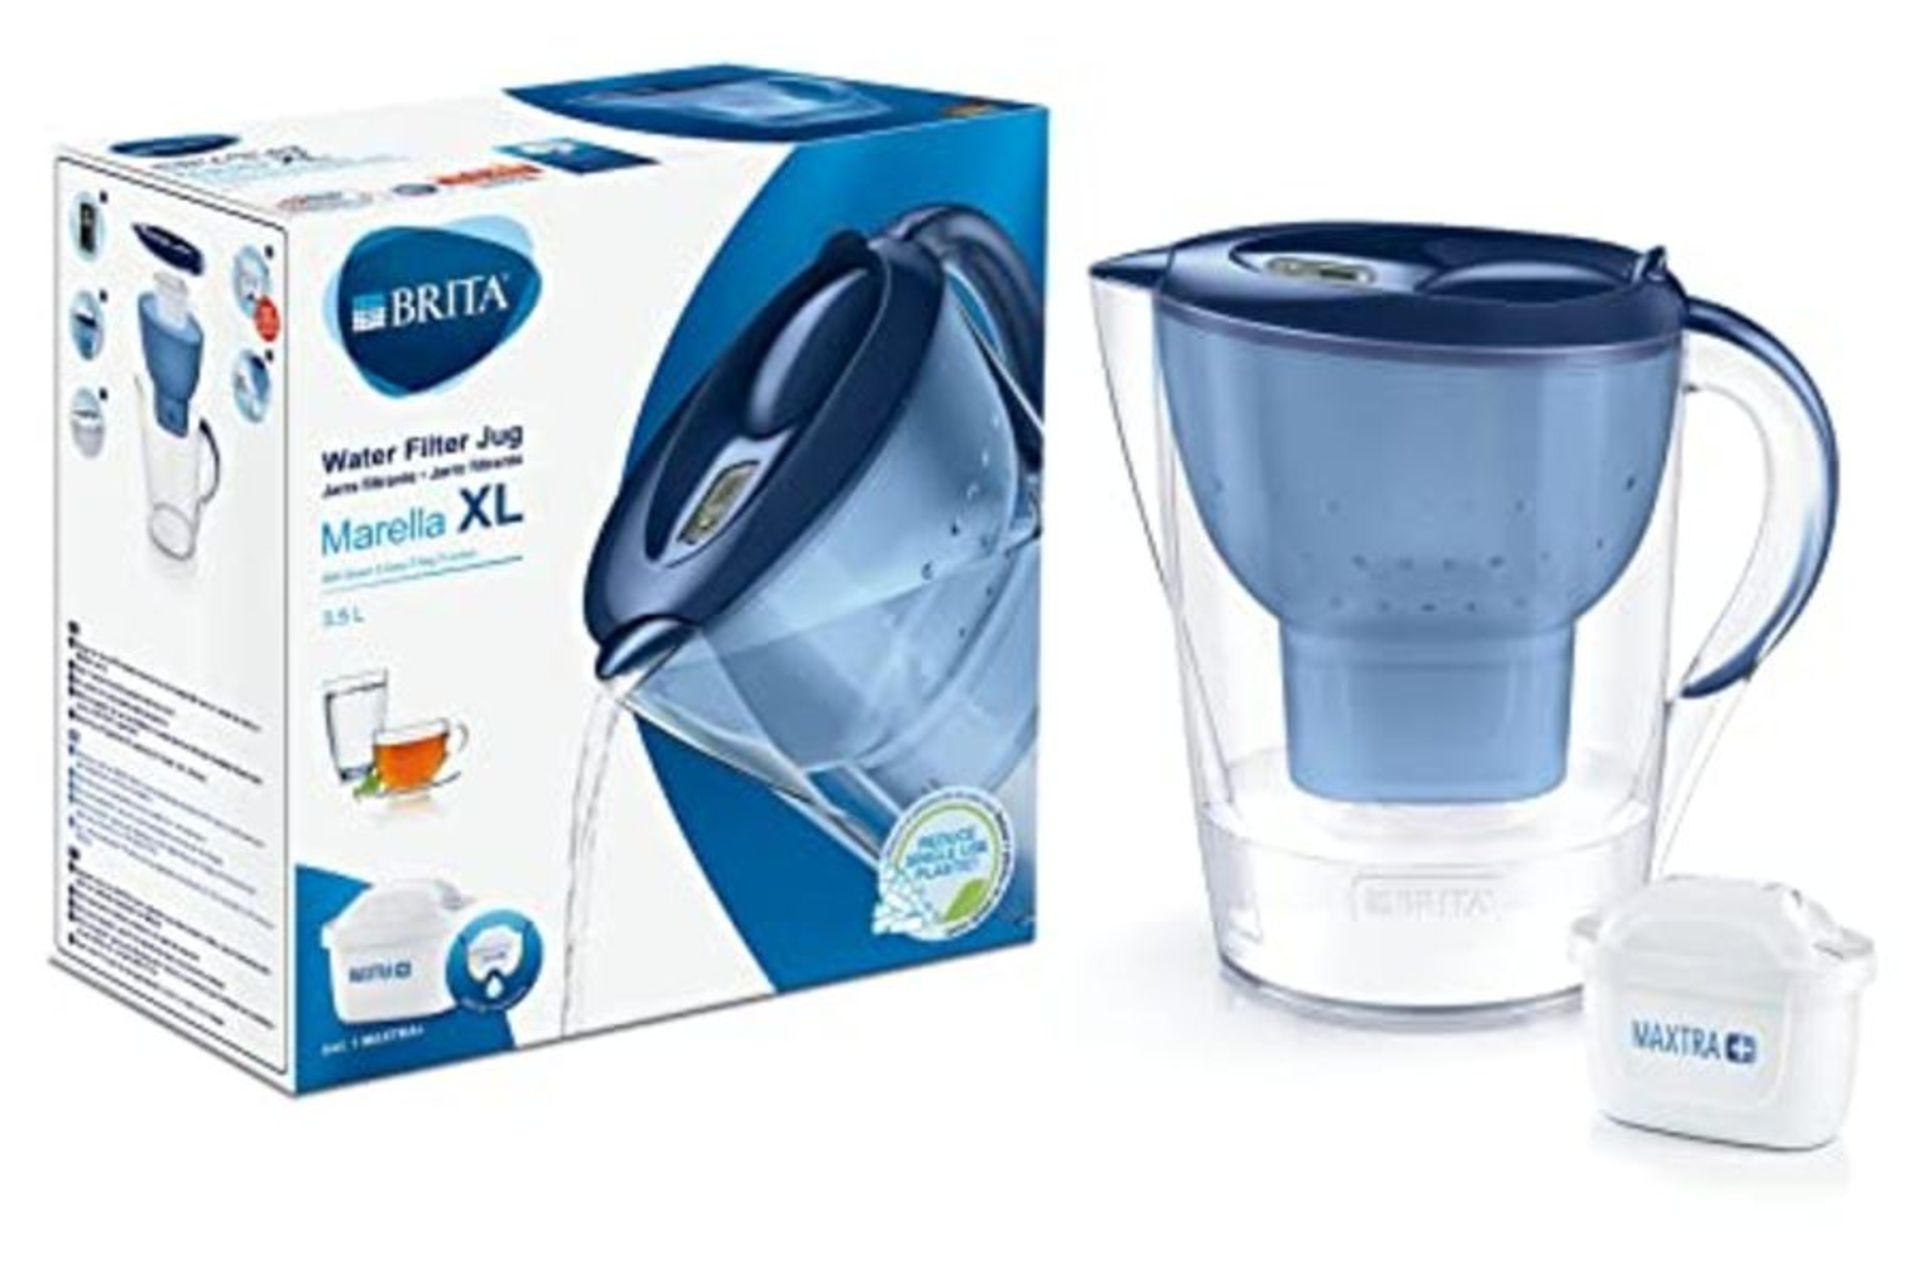 [INCOMPLETE] BRITA Marella XL water filter jug for reduction of chlorine, limescale an